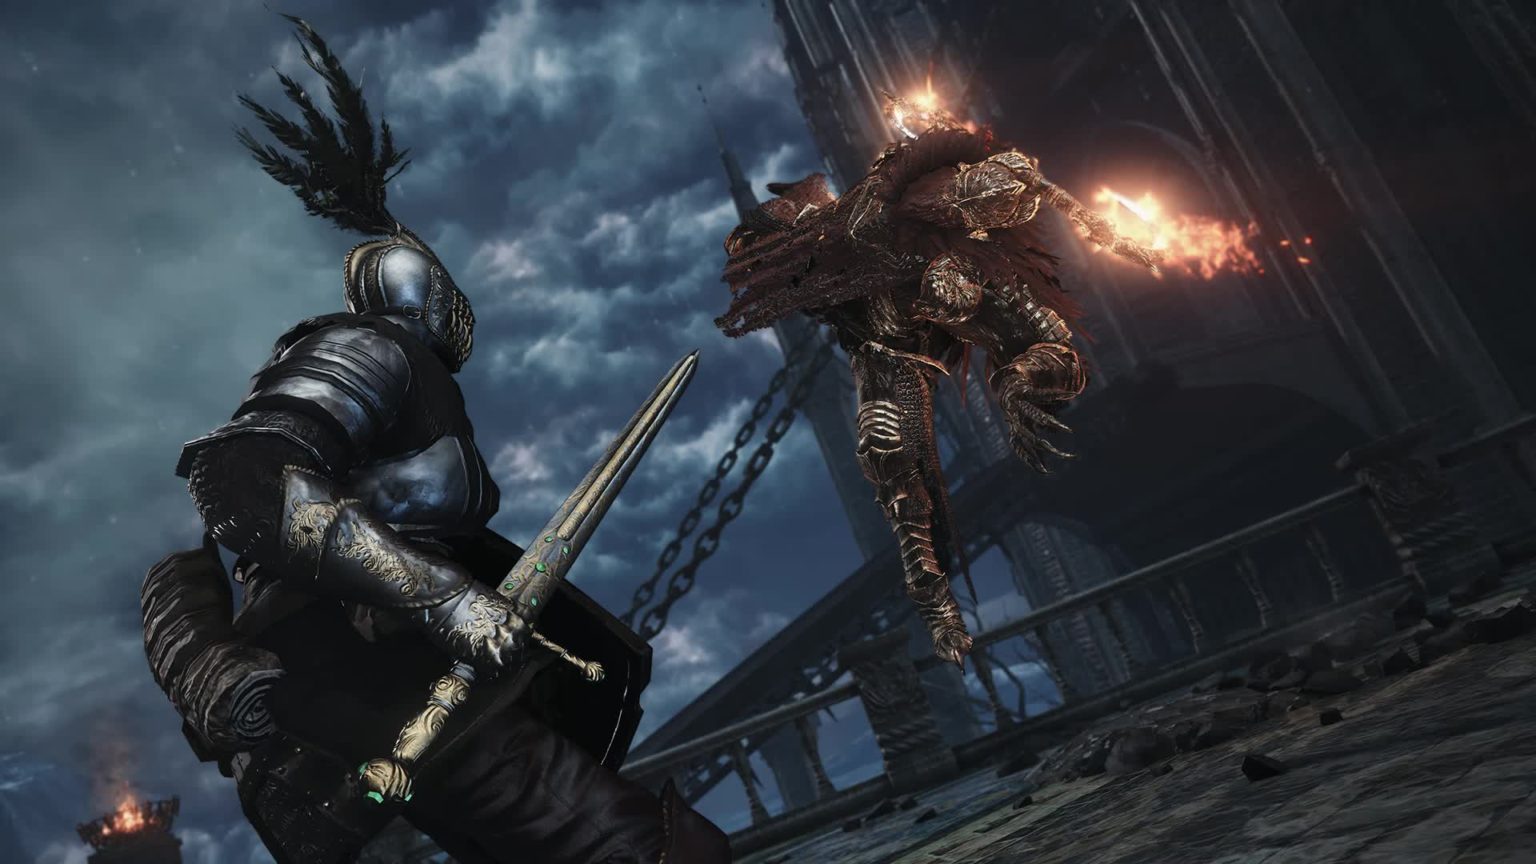 Colossal Dark Souls 3 mod combines the best of FromSoft